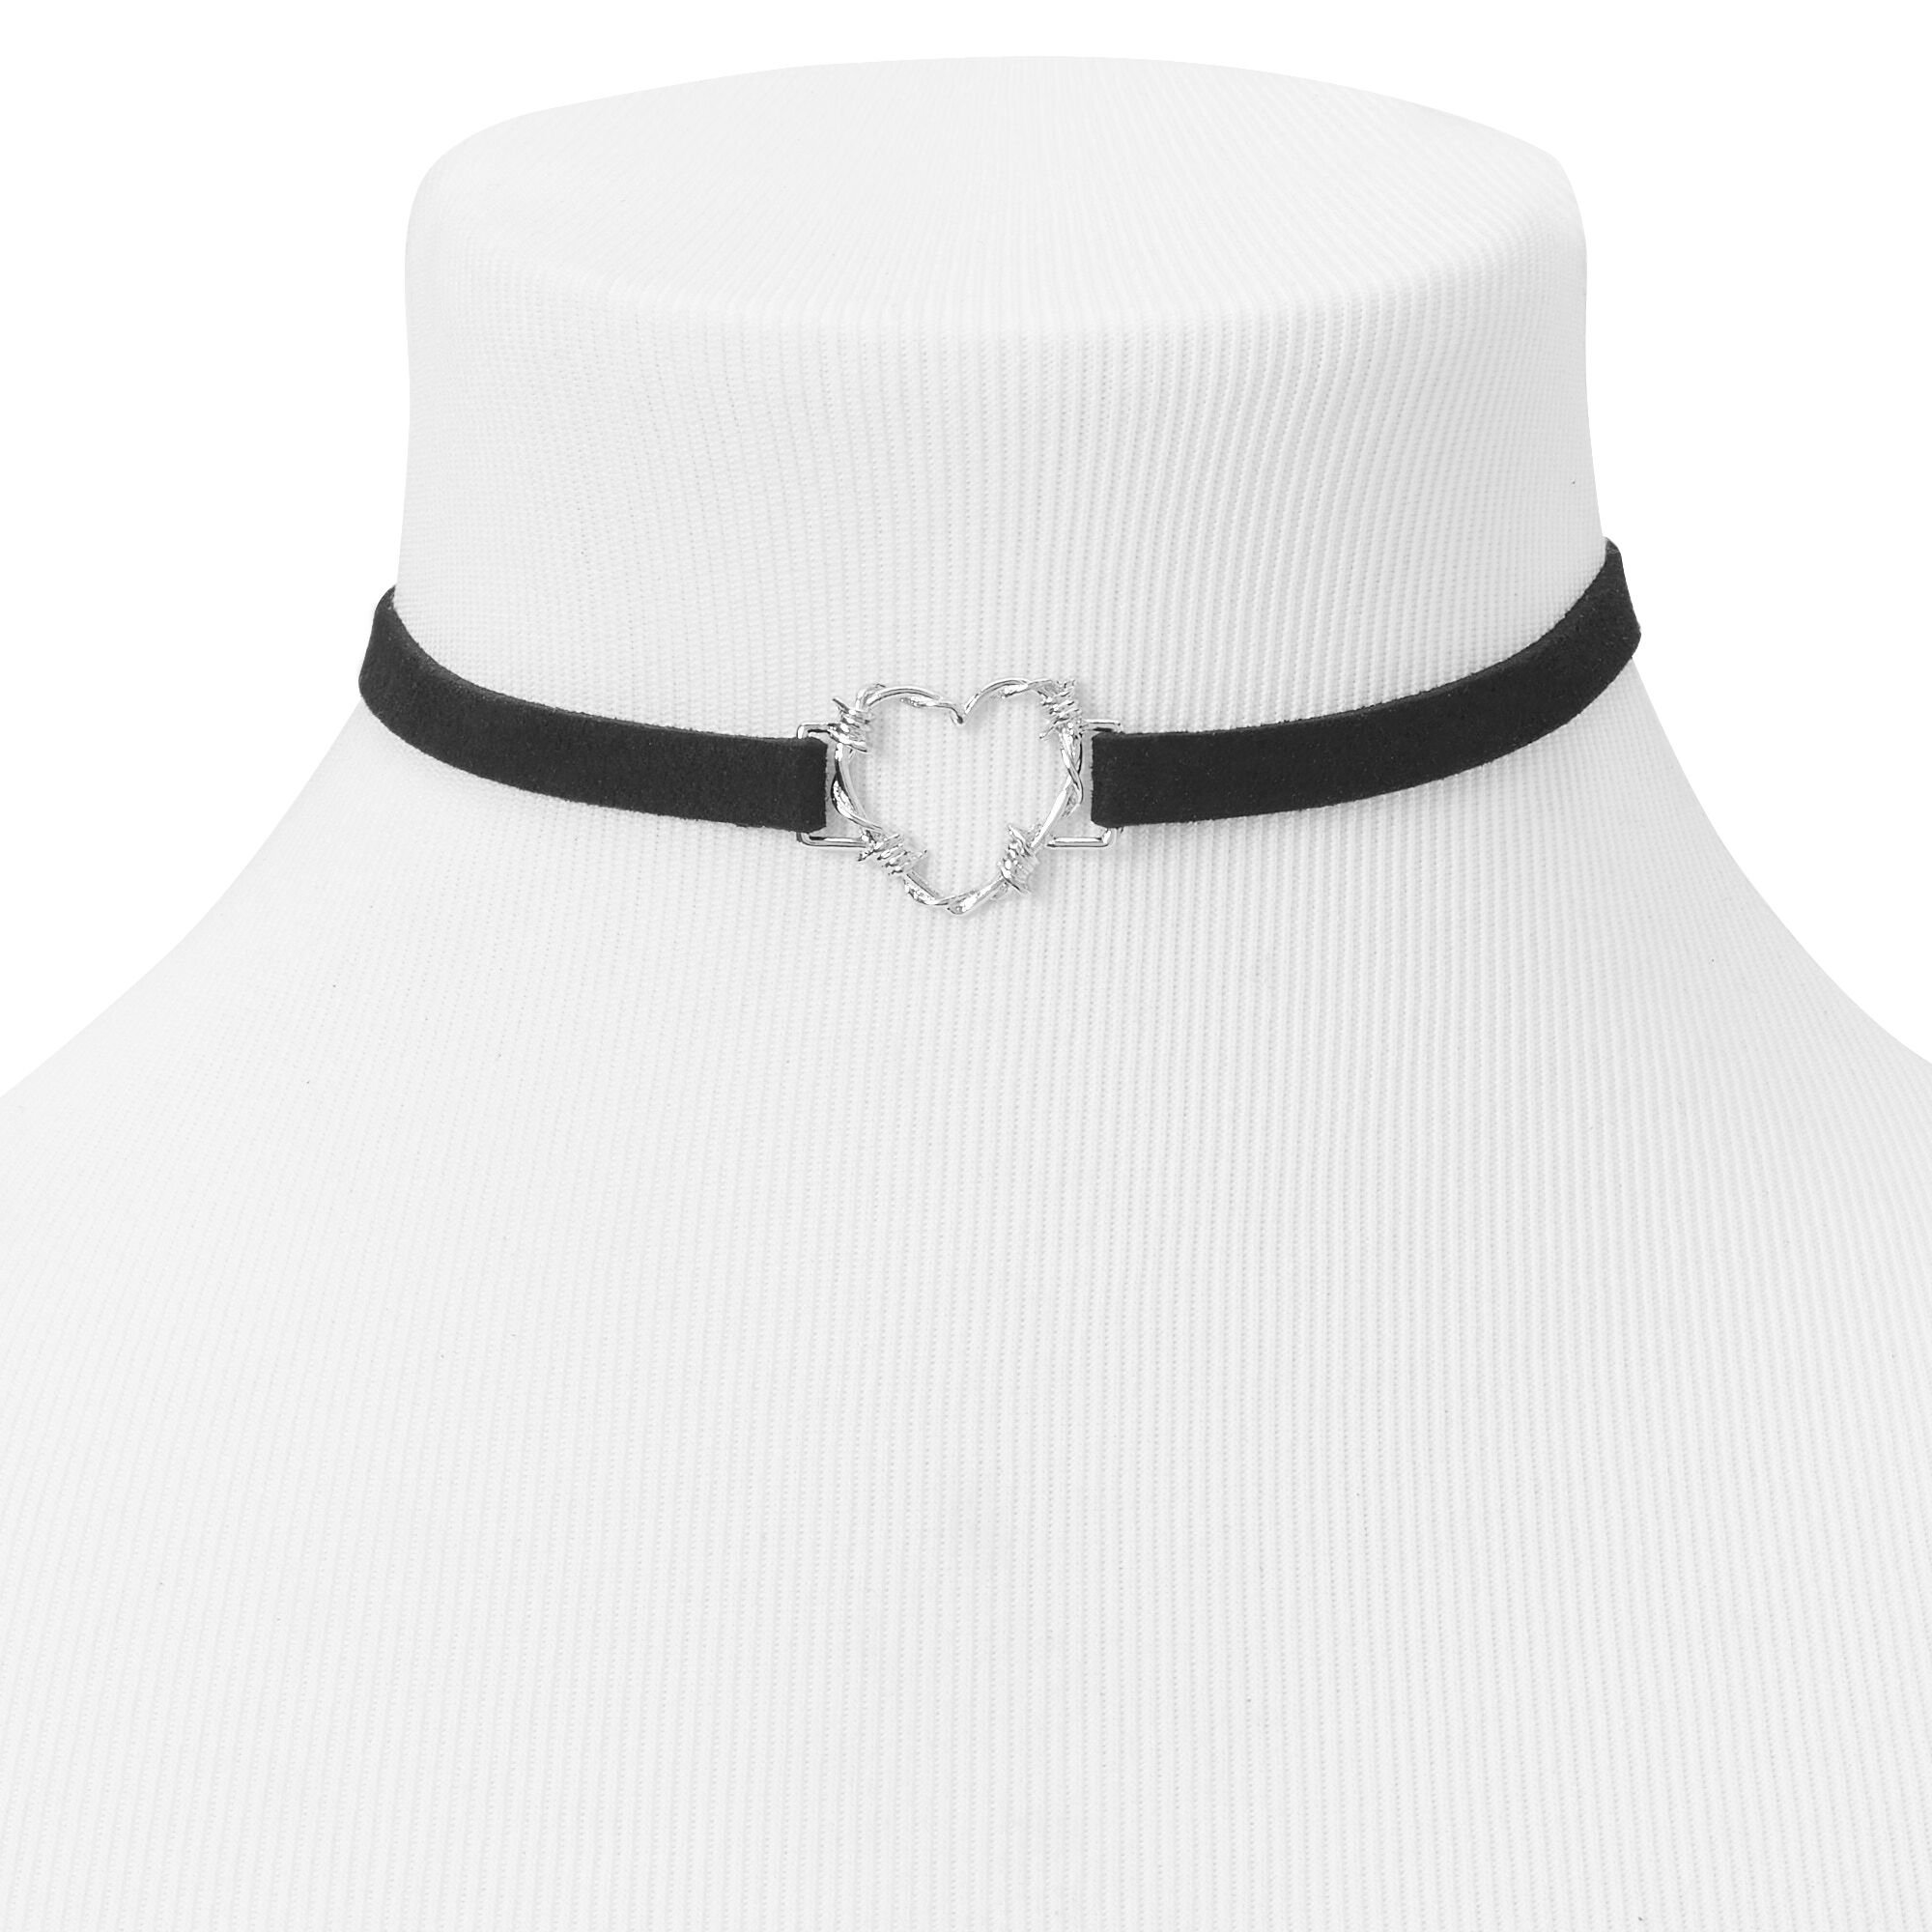 View Claires Silver Heart Charm Choker Necklace Black information